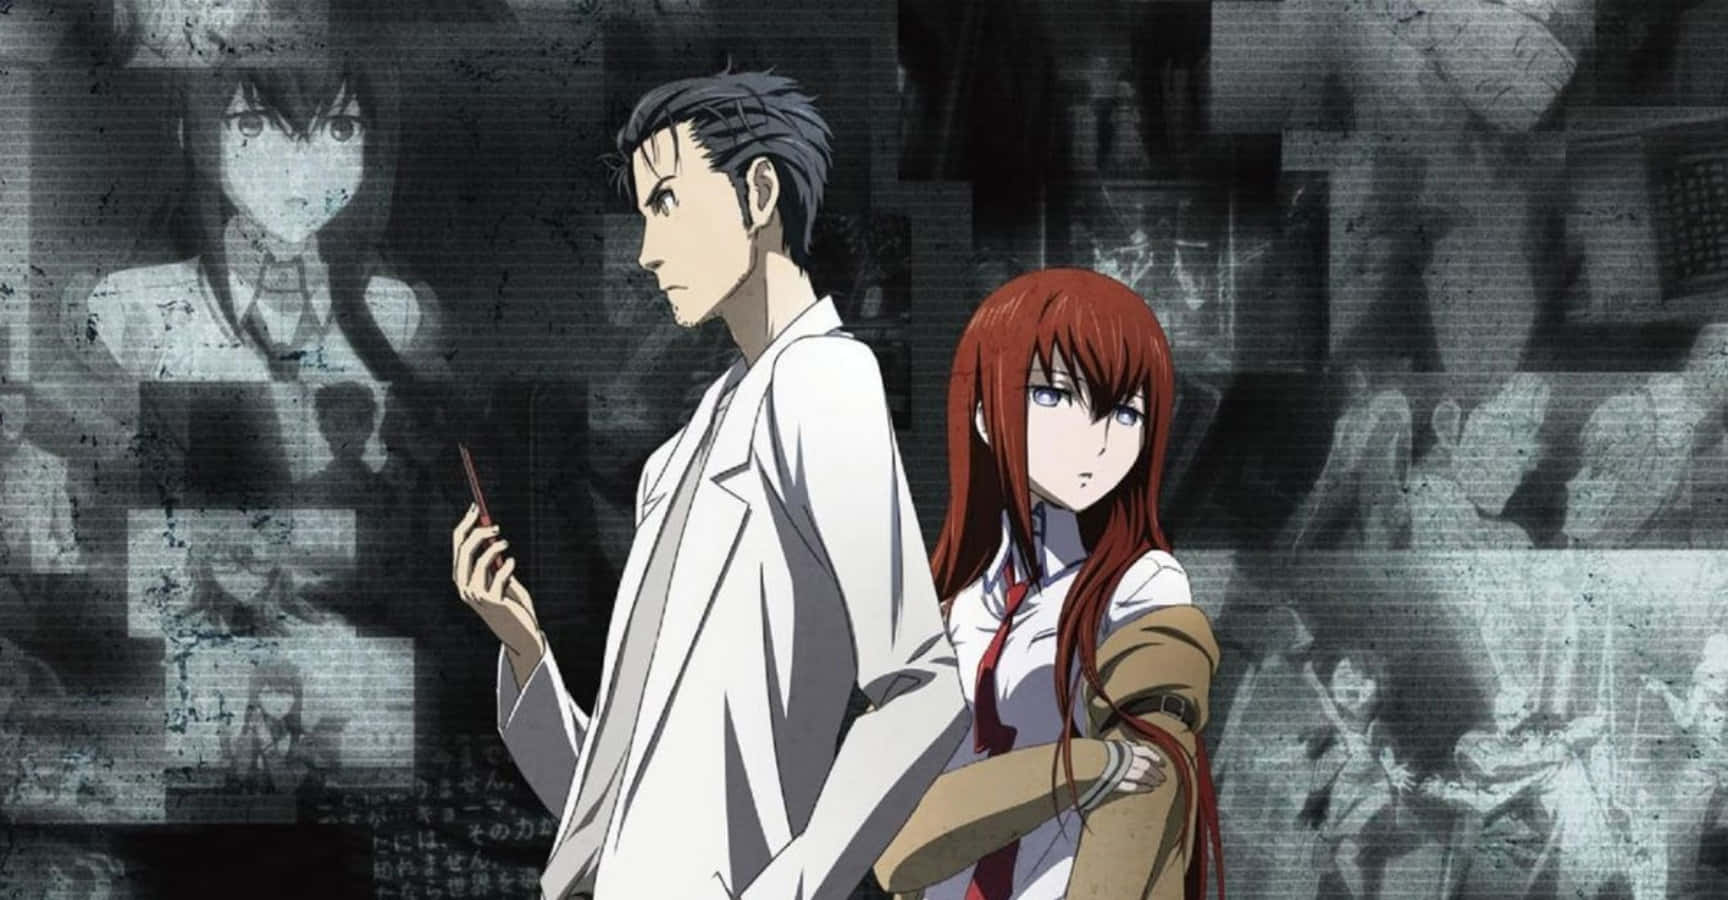 Join Okabe and the Future Gadget Lab in Steins Gate